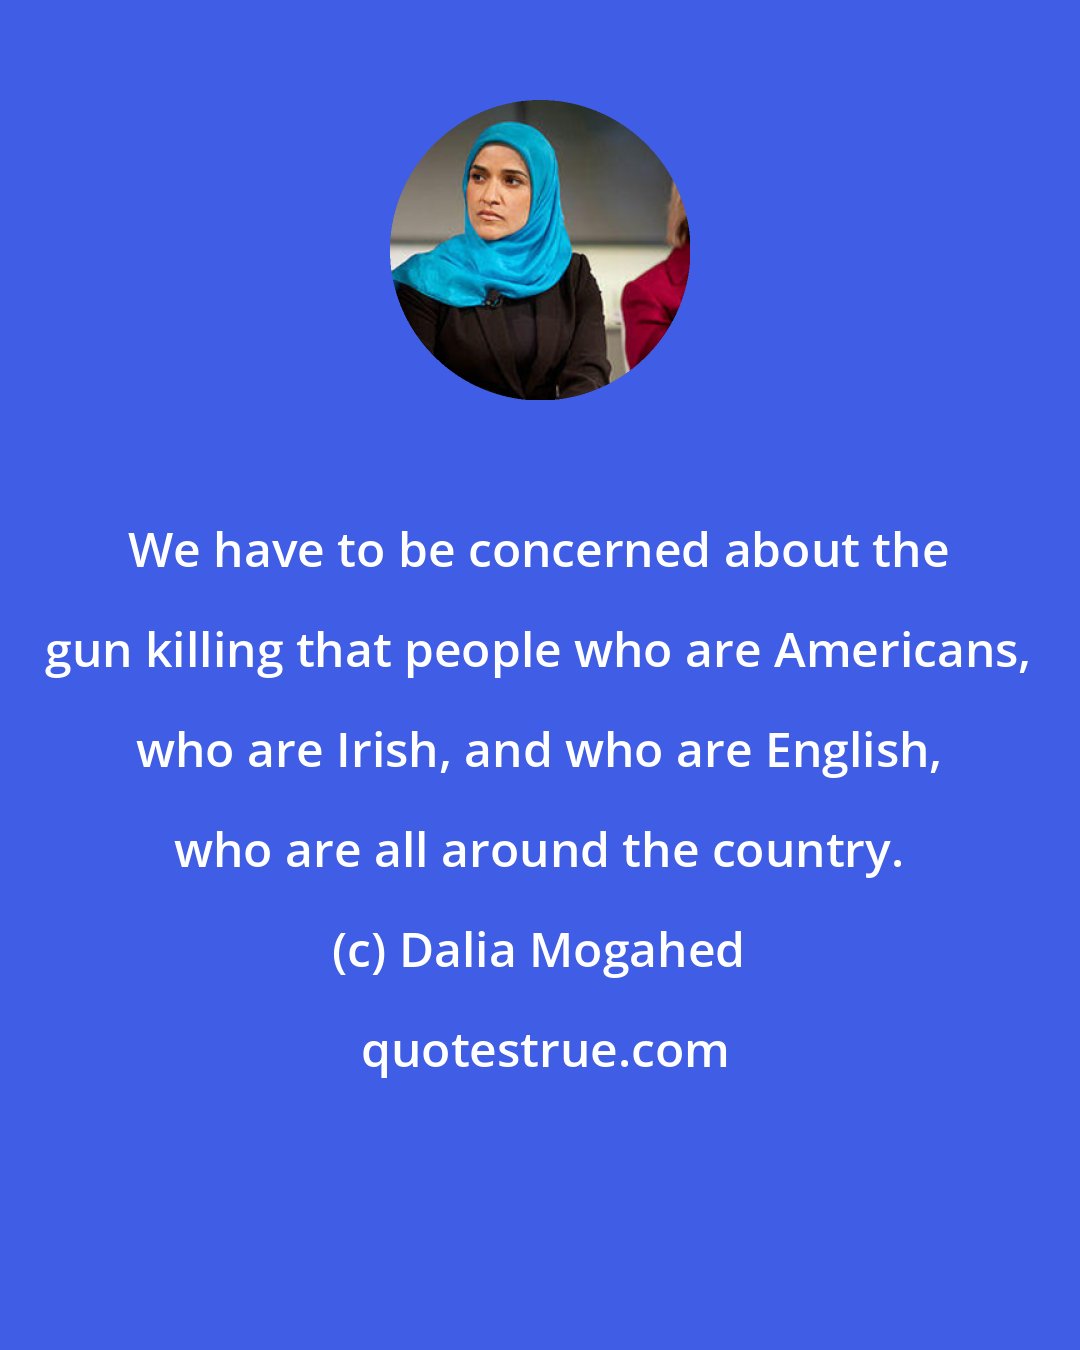 Dalia Mogahed: We have to be concerned about the gun killing that people who are Americans, who are Irish, and who are English, who are all around the country.